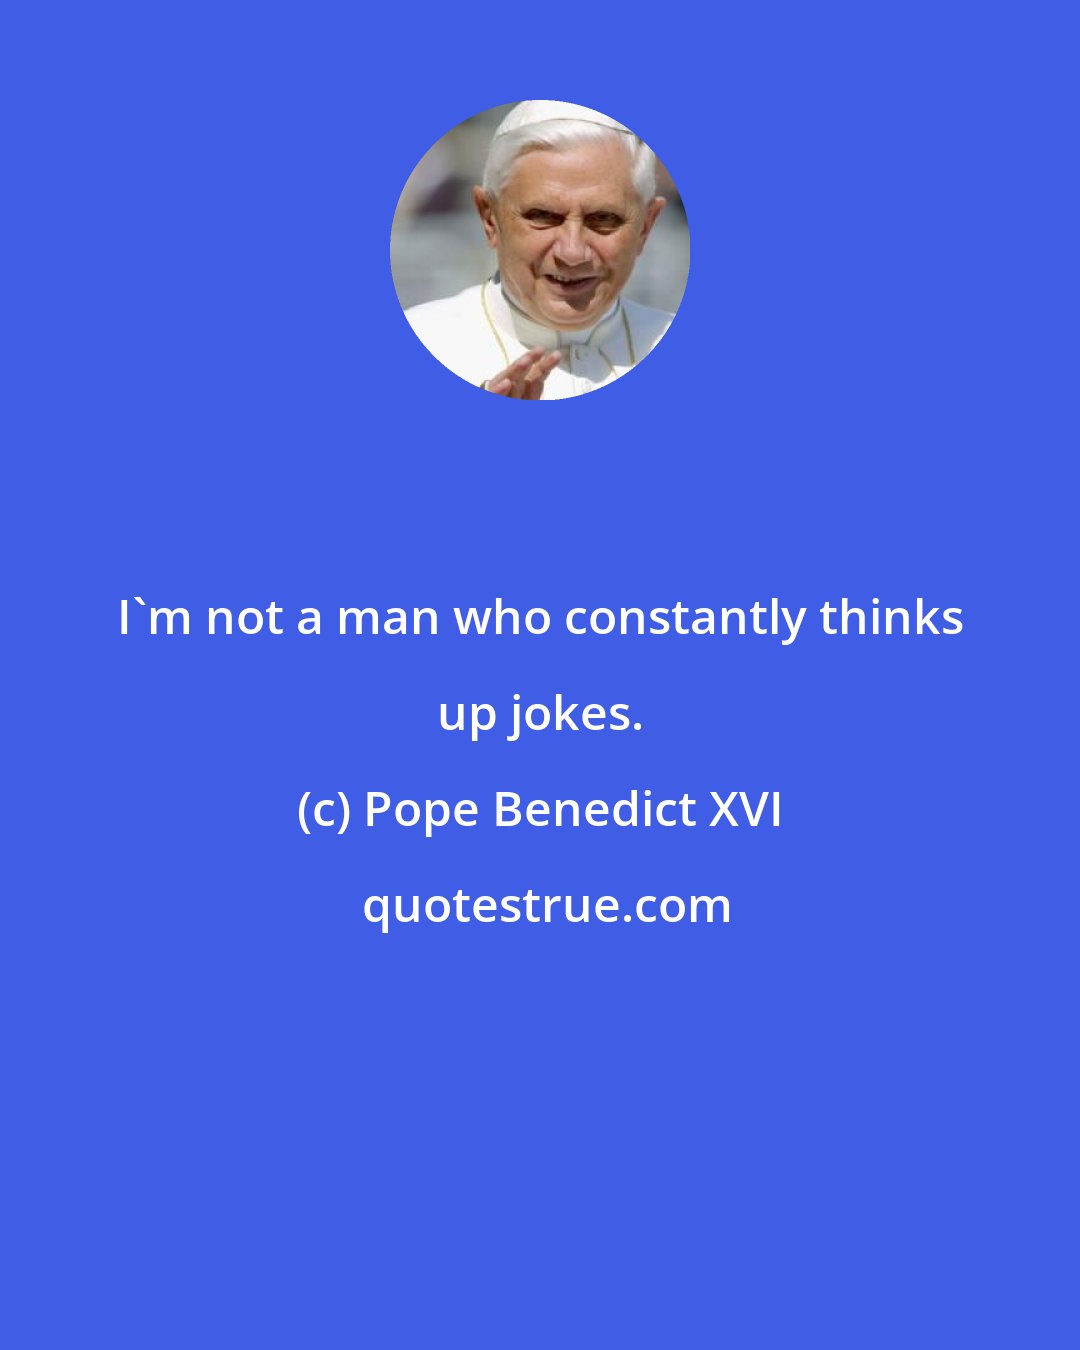 Pope Benedict XVI: I'm not a man who constantly thinks up jokes.